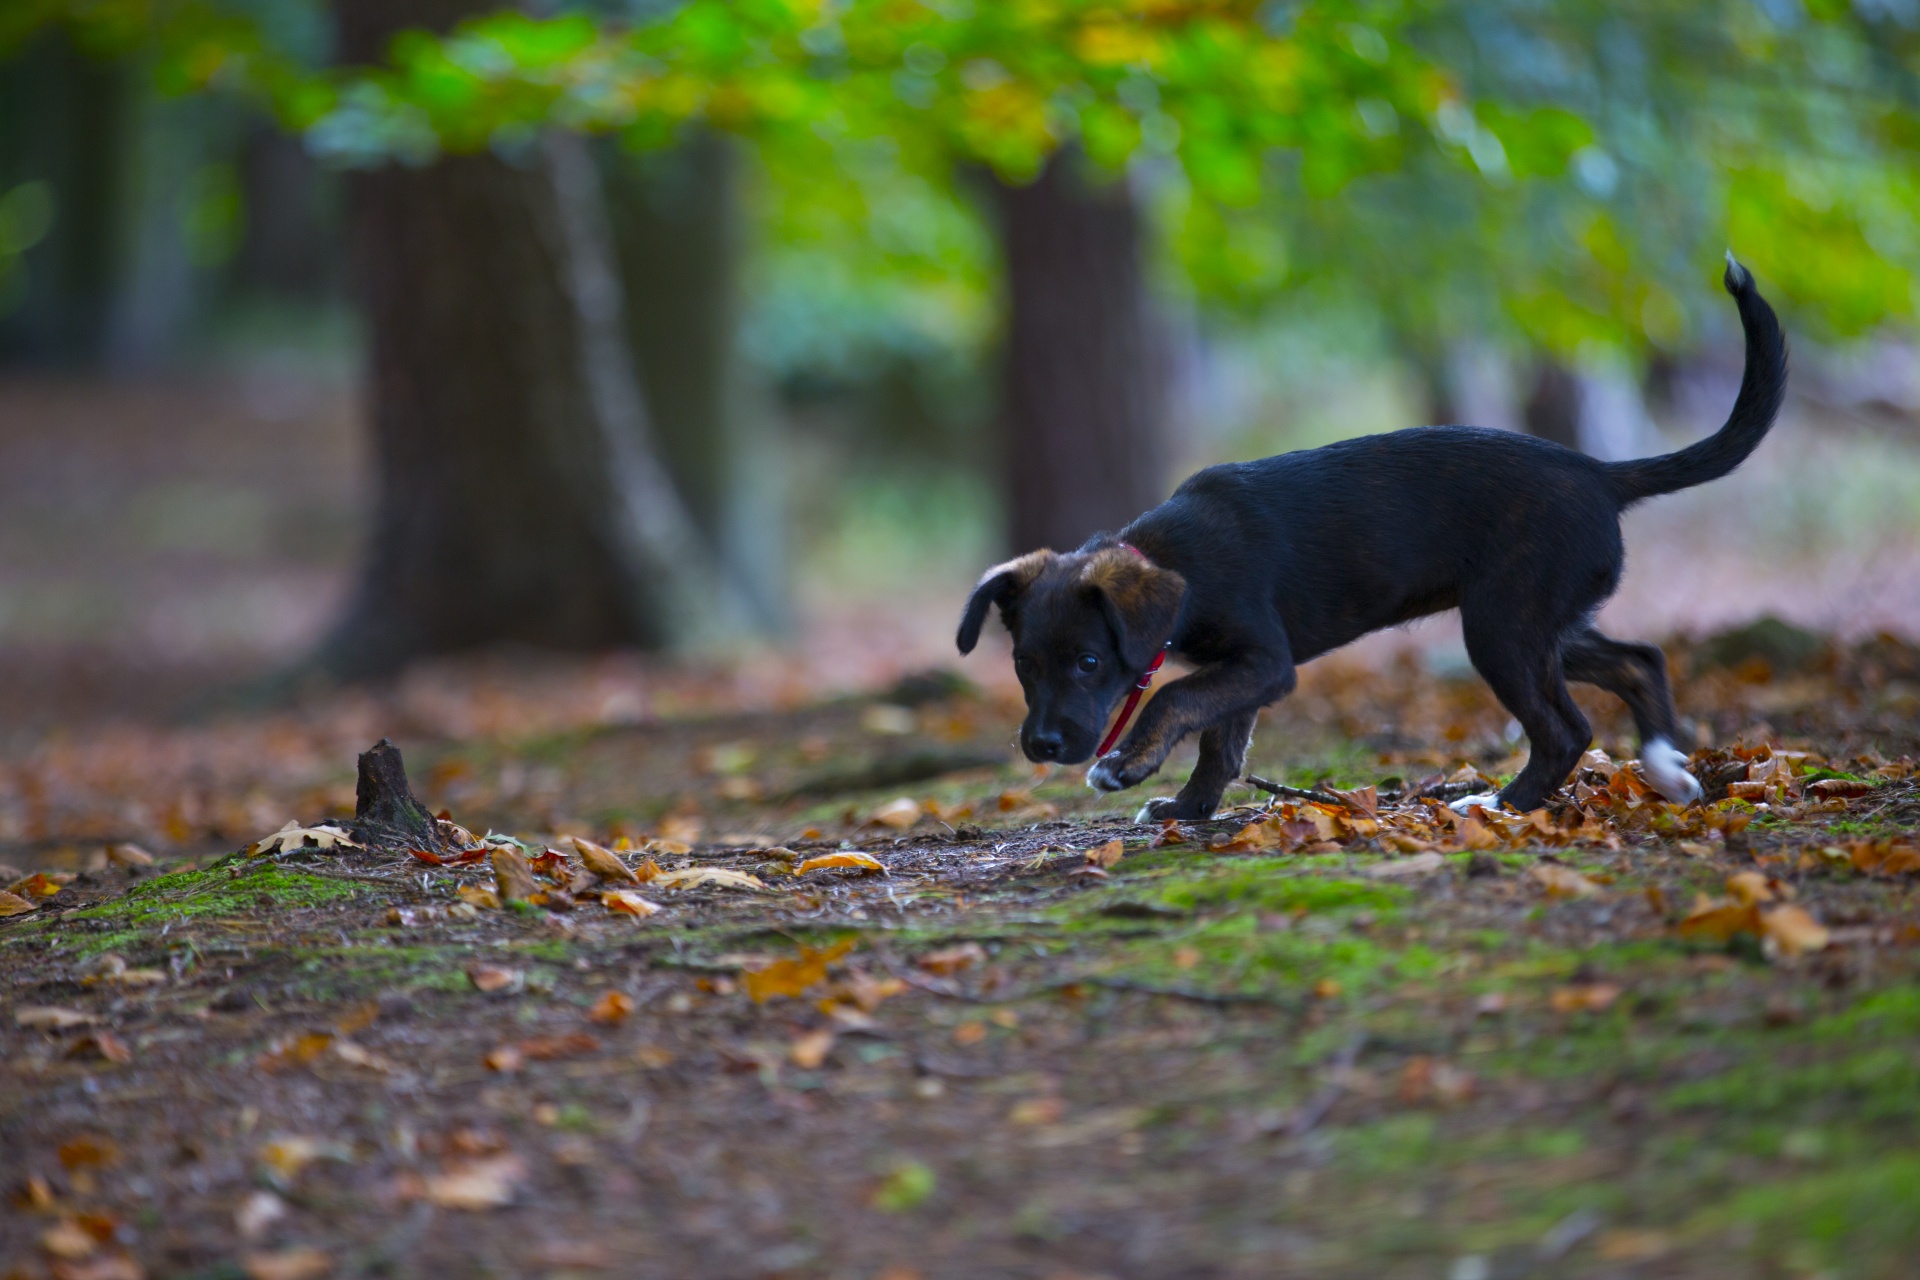 A black puppy sniffs at the ground outside